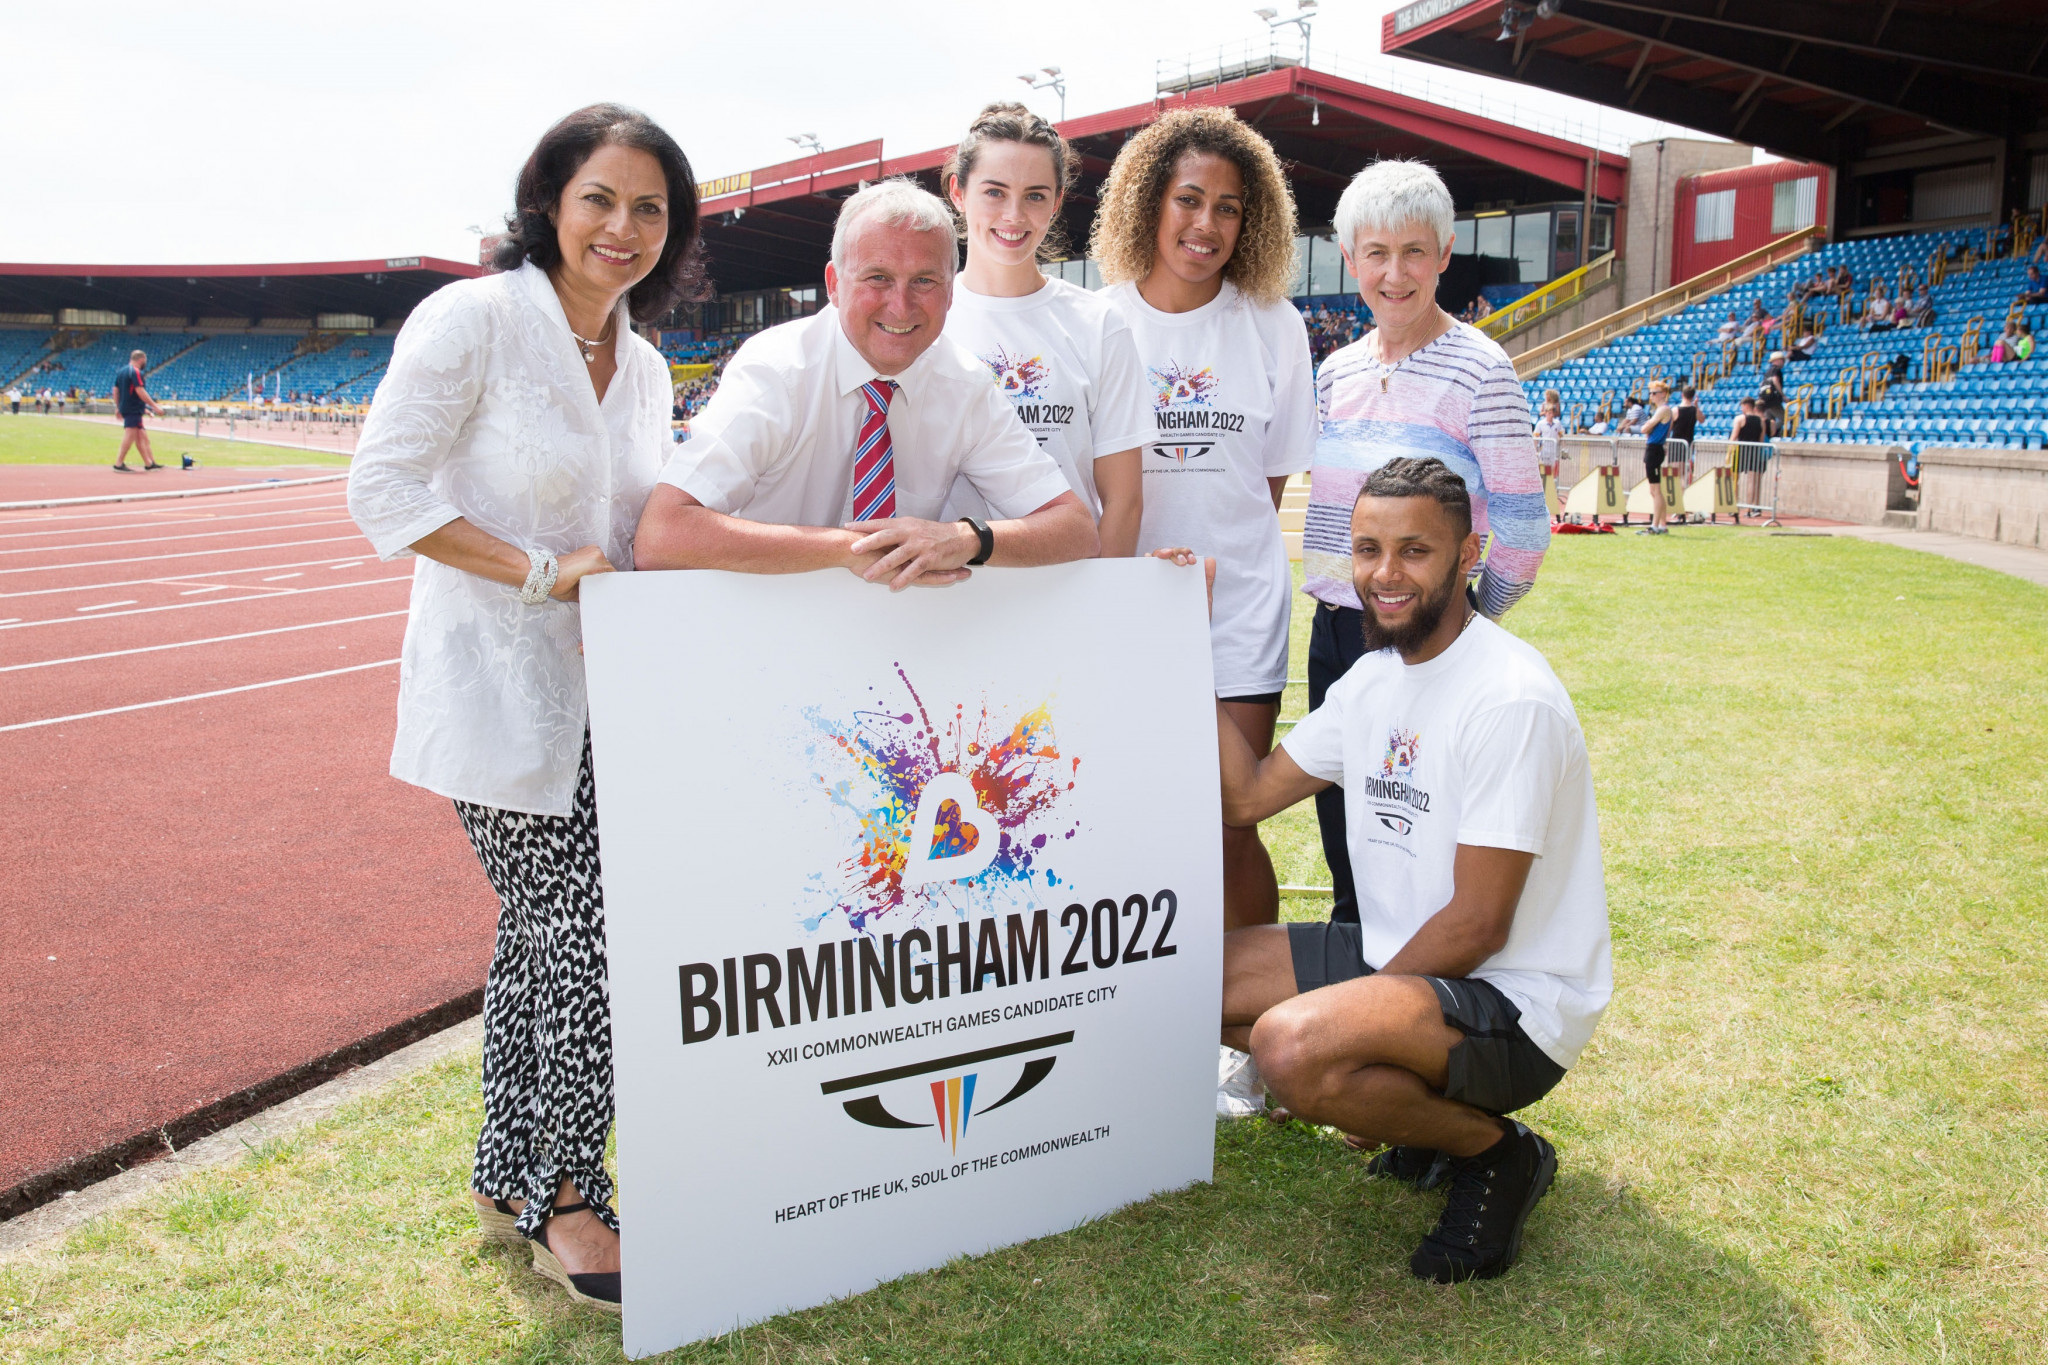 Birmingham City Council Leader and head of the bid for the 2022 Commonwealth Games Ian Ward, second left, helped persuade Councillors to back a new financial offer ©Birmingham 2022